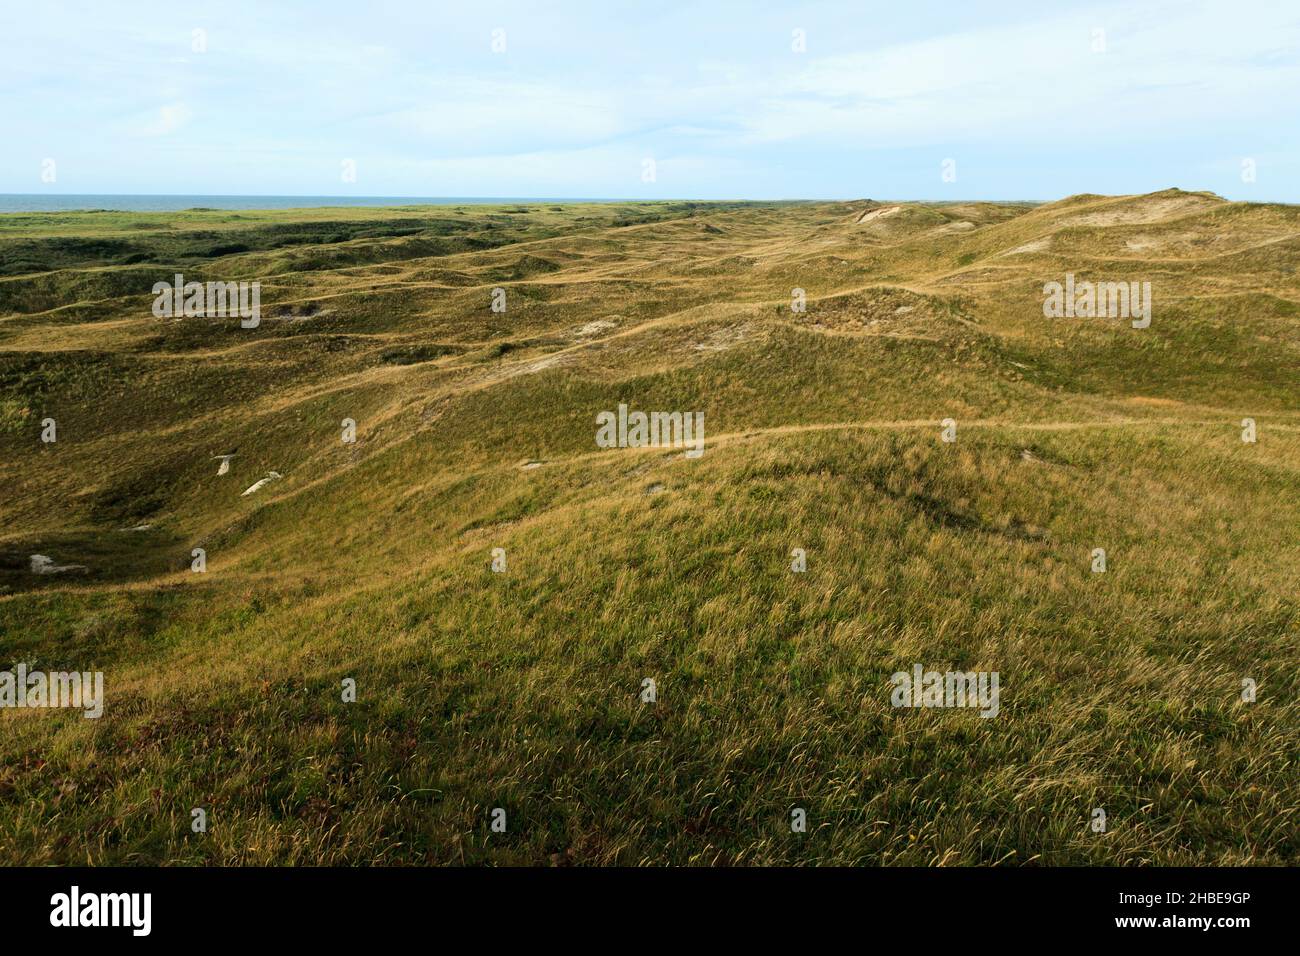 Sand dunes, well established and inland from present coastline, overgrown with vegetation, Island of Texel, Holland, Europe, Stock Photo